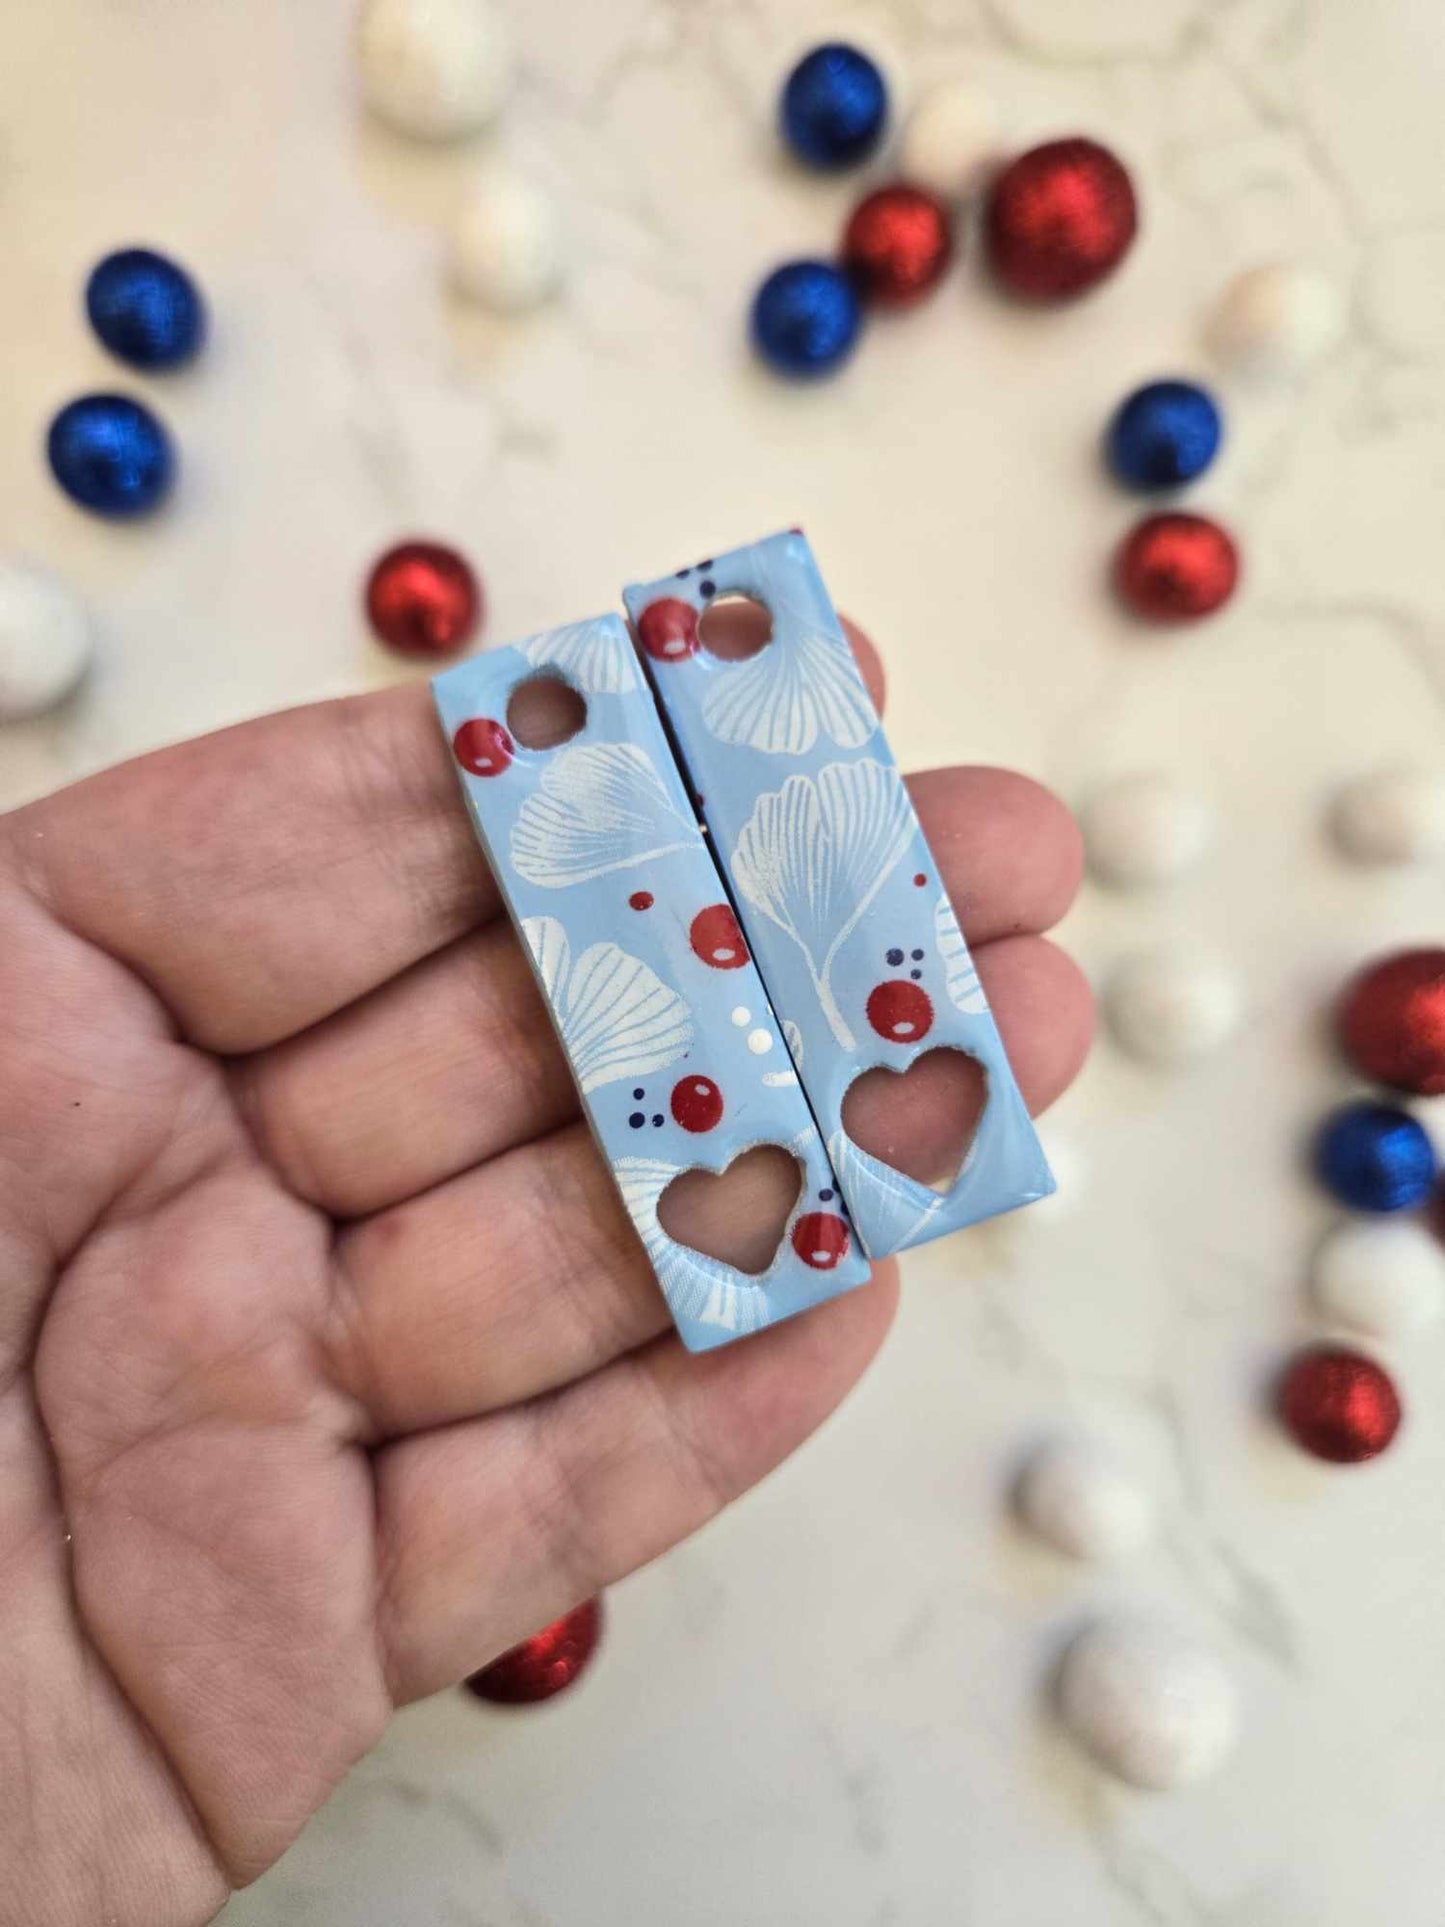 Floss Drop - RED, WHITE, & BLUE